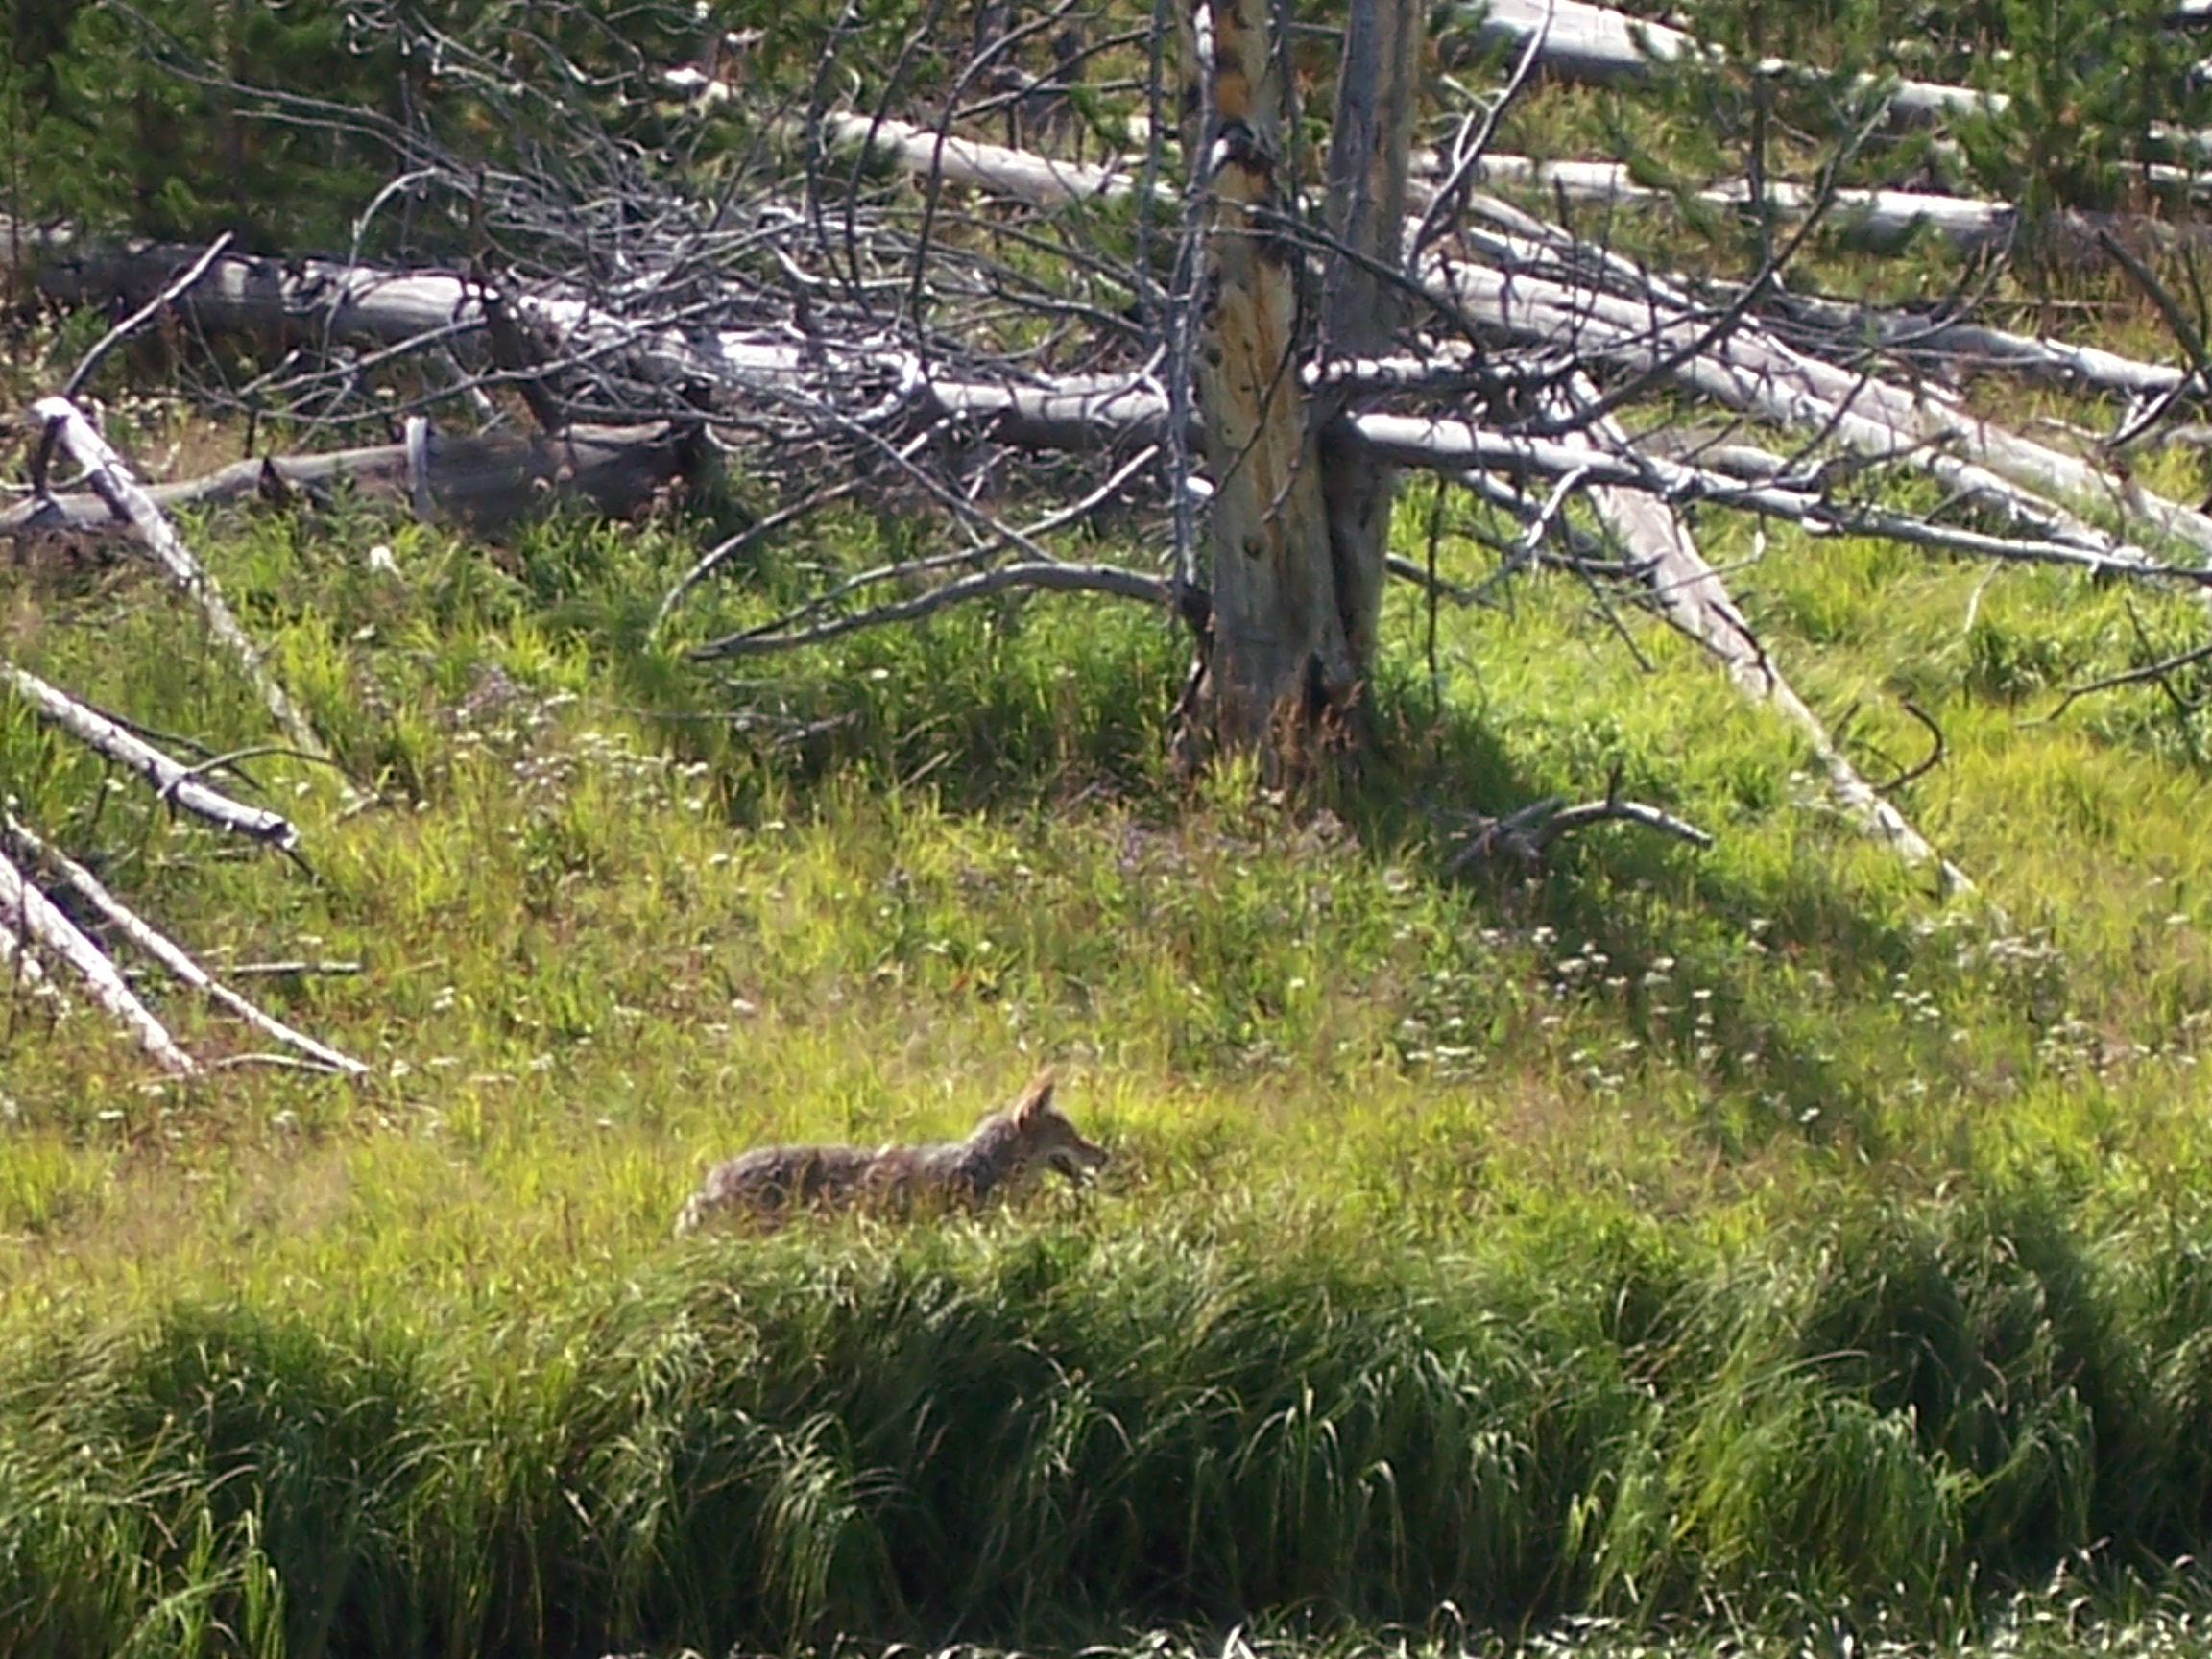 Coyote in the grass.